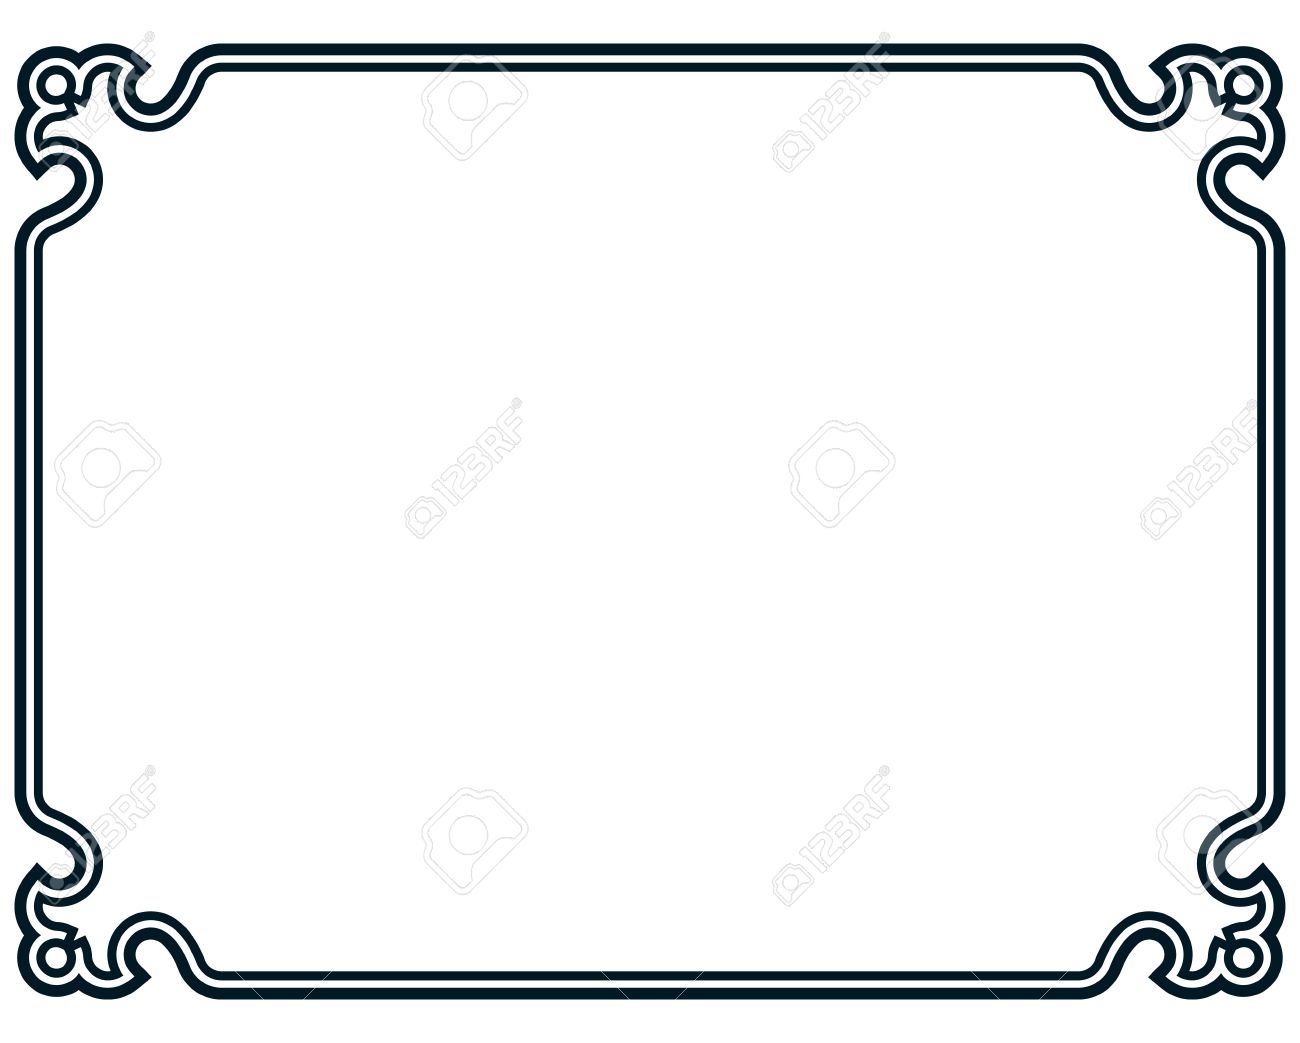 Label clipart simple. Border free download best